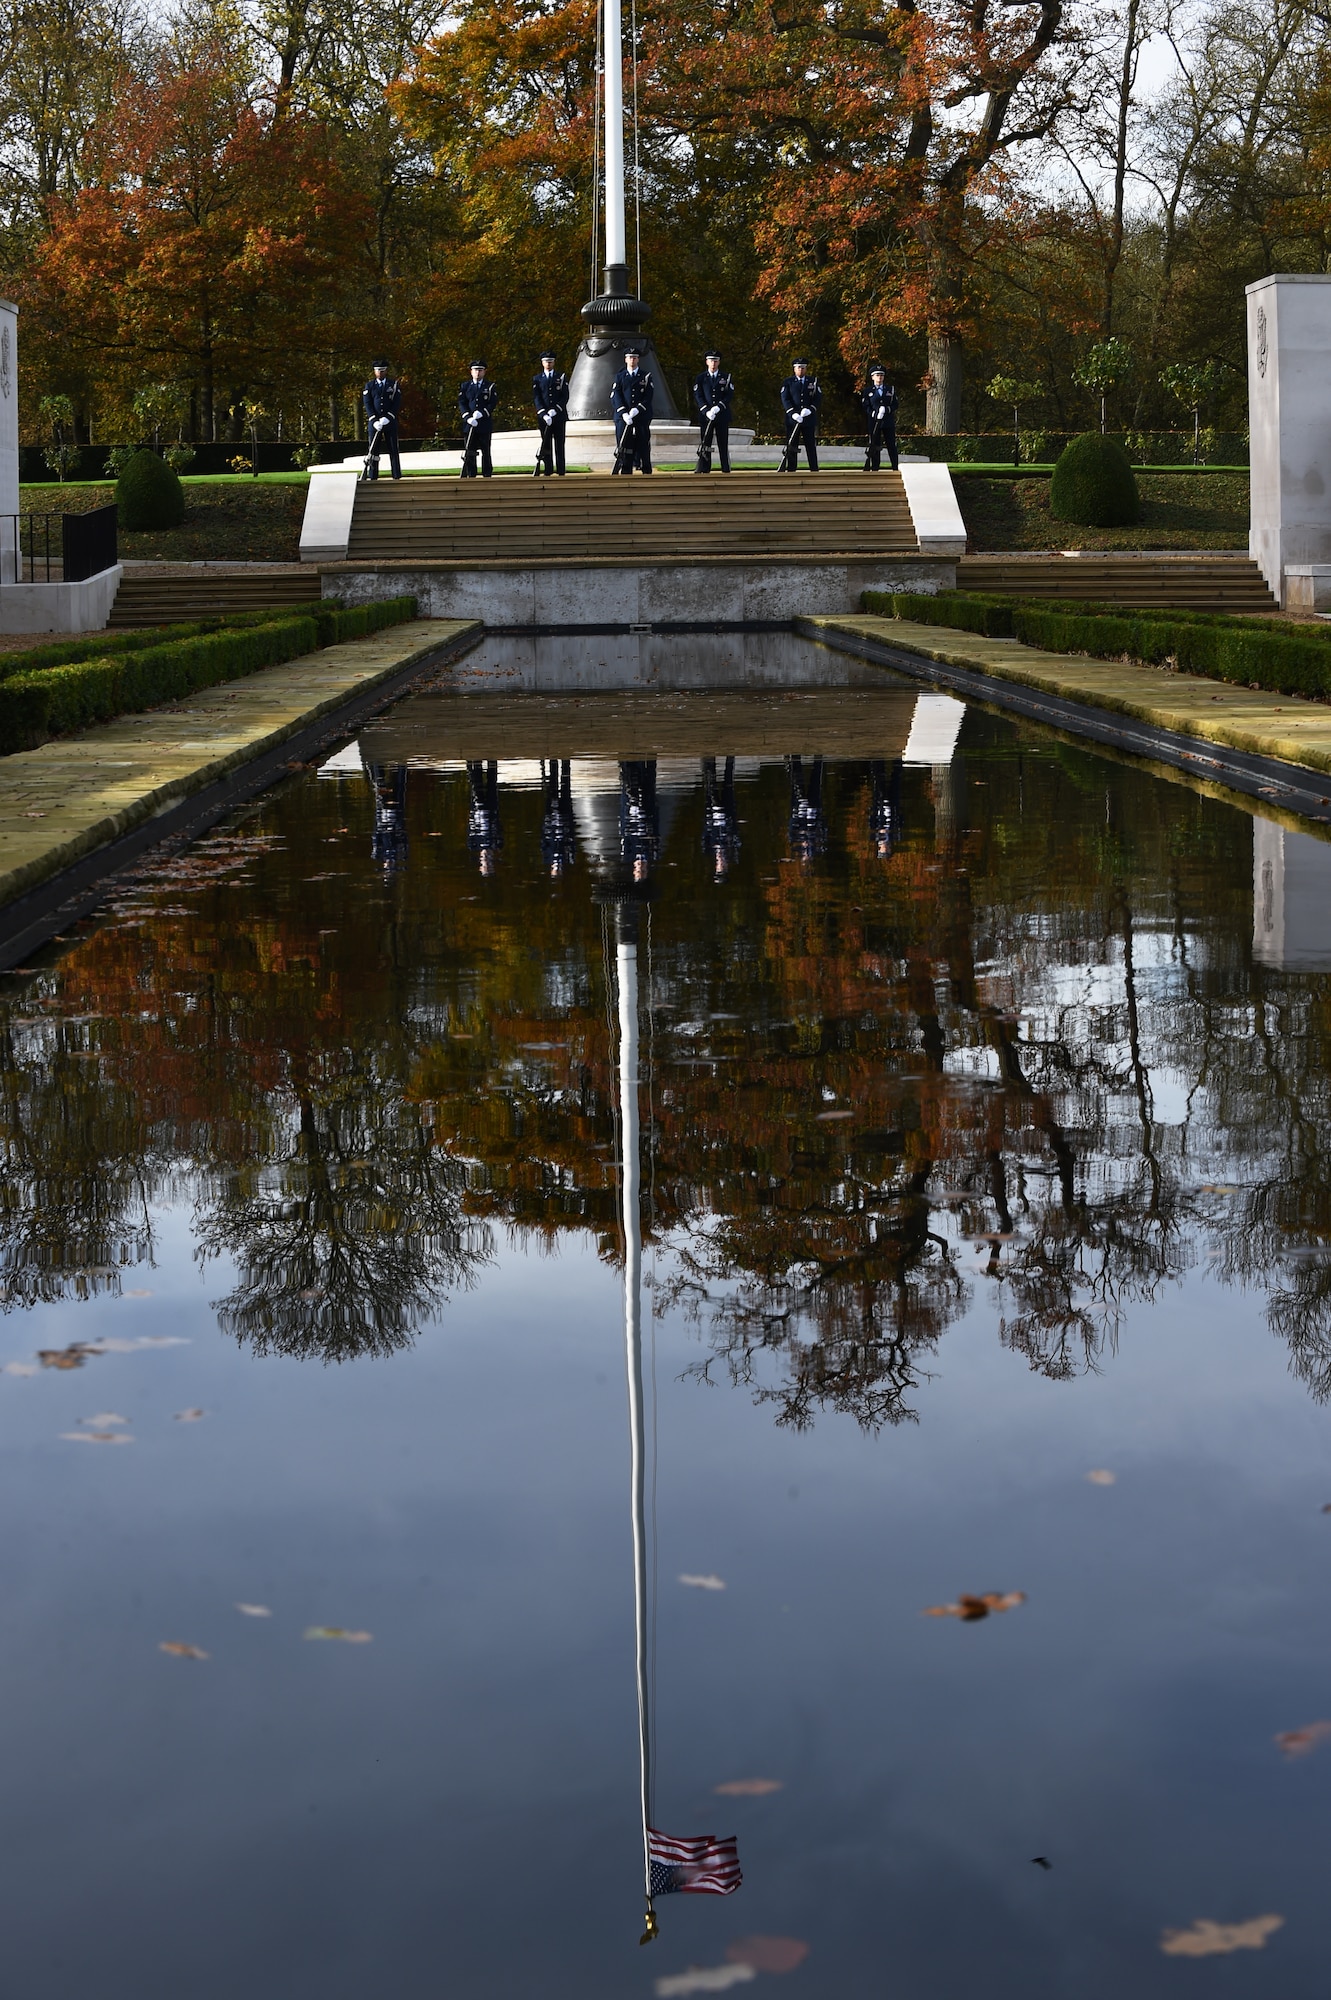 U.S. Air Force Airmen, from the 501st Combat Support Wing honor guard, stand at parade rest during a Veterans Day ceremony at Cambridge American Cemetery, United Kingdom, Nov. 11, 2015. The ceremony honored both the 3,812 American Service members buried at the cemetery, along with veterans both past and present. (U.S. Air Force photo by Staff Sgt. Jarad A. Denton/Released)